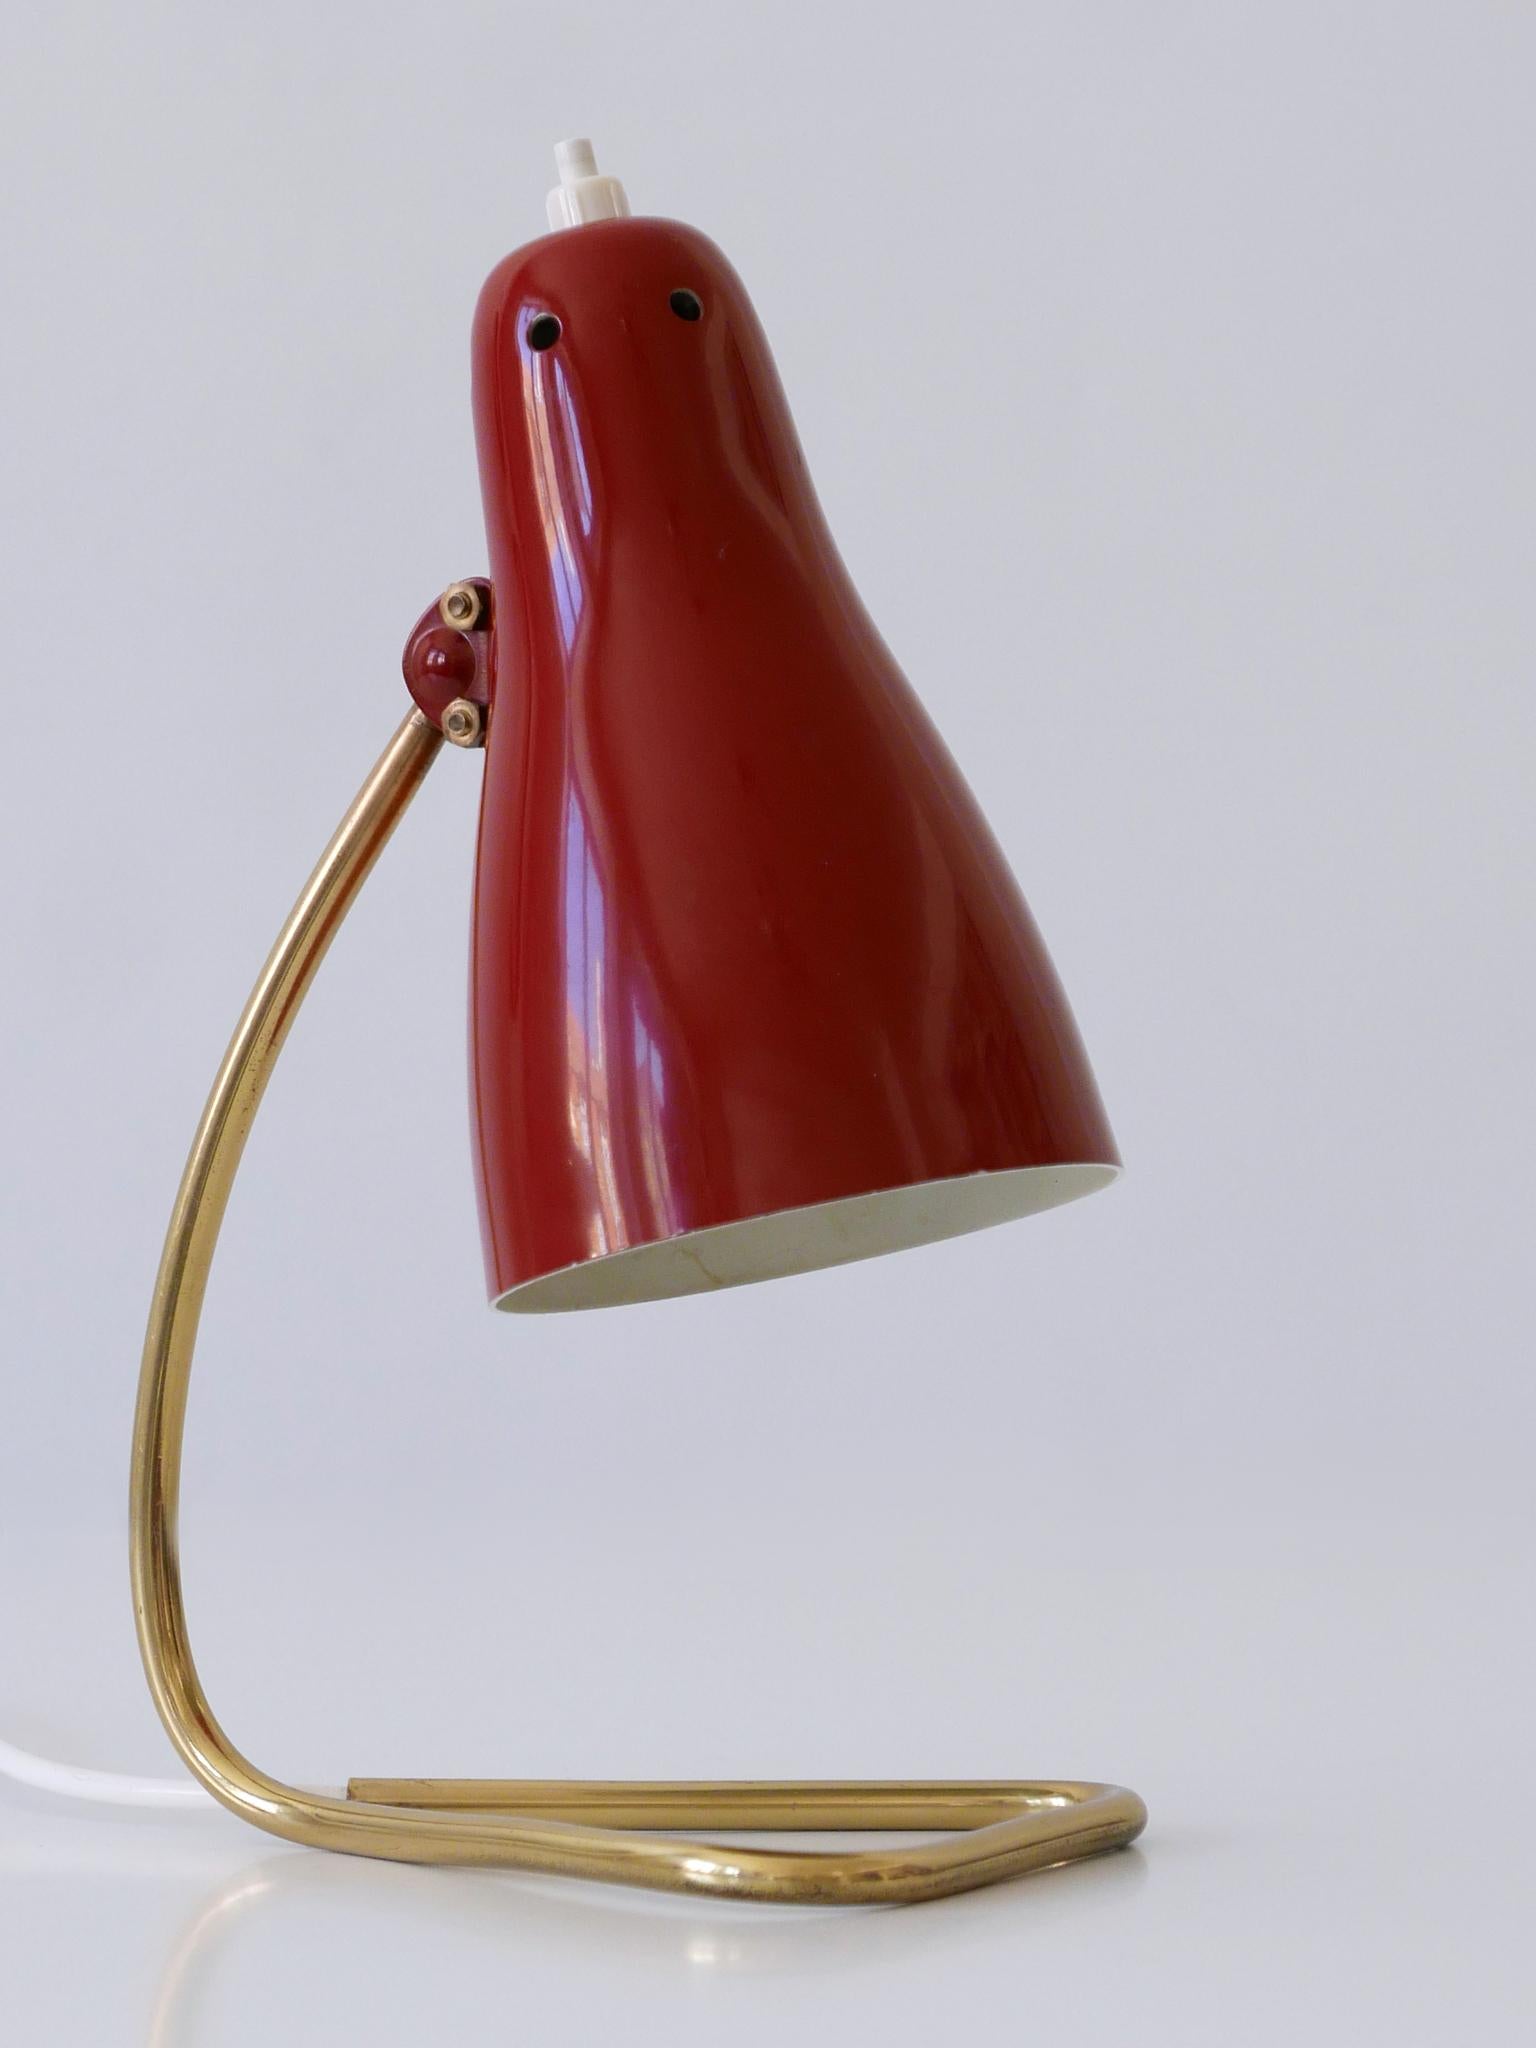 Aluminum Lovely Mid-Century Modern Table Lamp or Sconce by Rupert Nikoll, Austria, 1960s For Sale